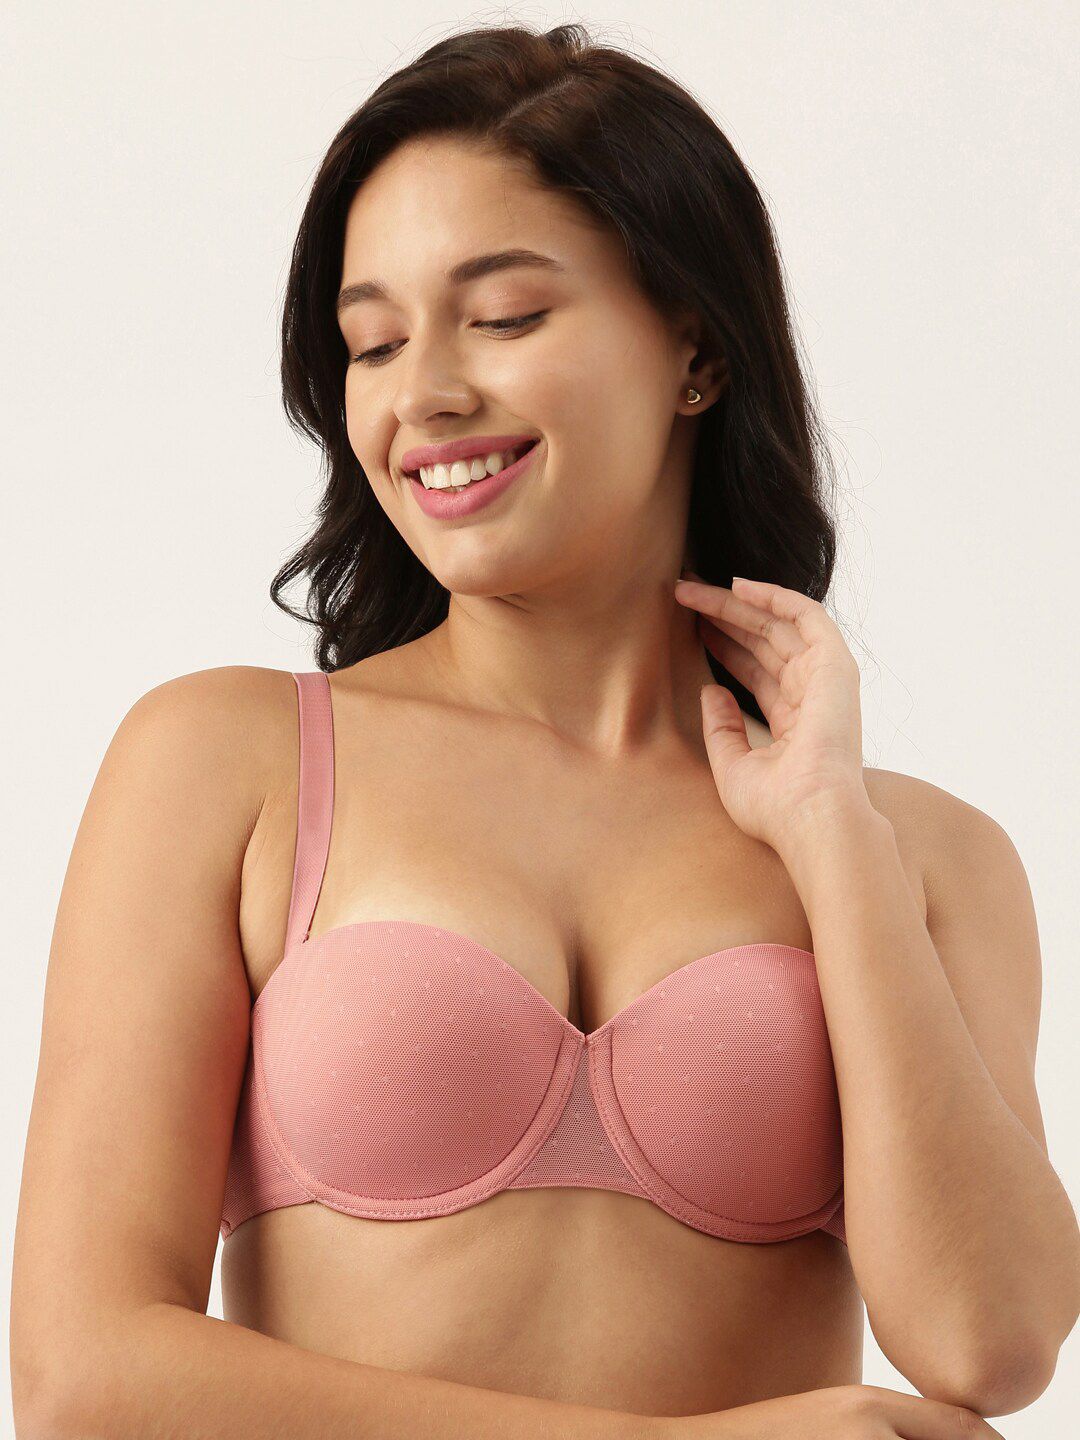 Non-Wired Non-Padded Bra with Lace Border